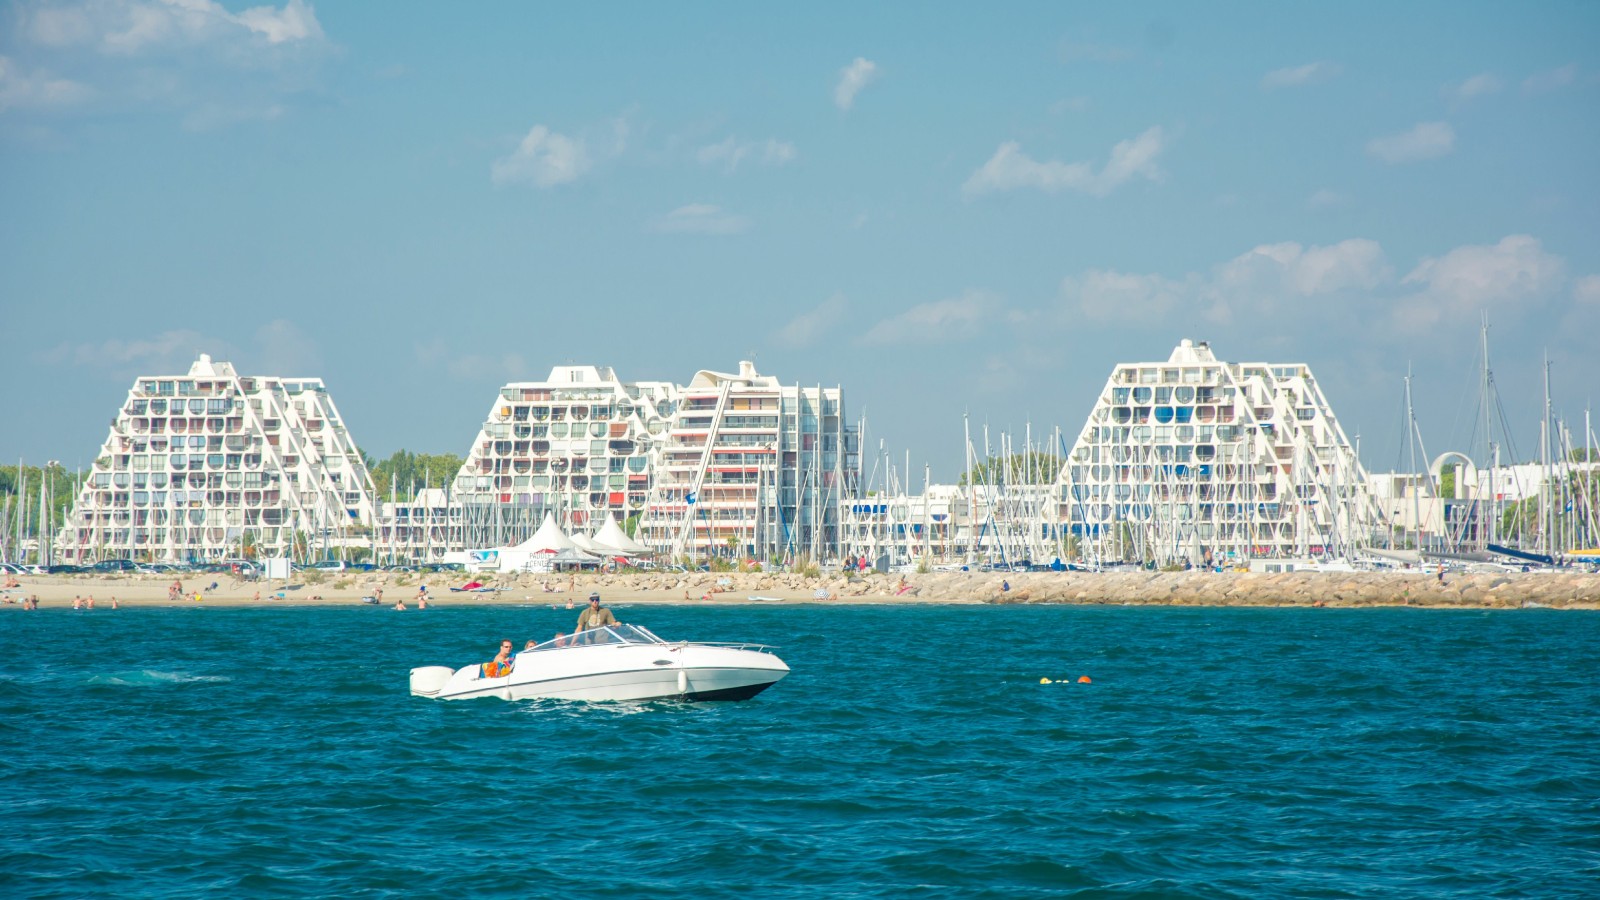 White triangular shaped buildings sitting on a sandy beach with blue skies